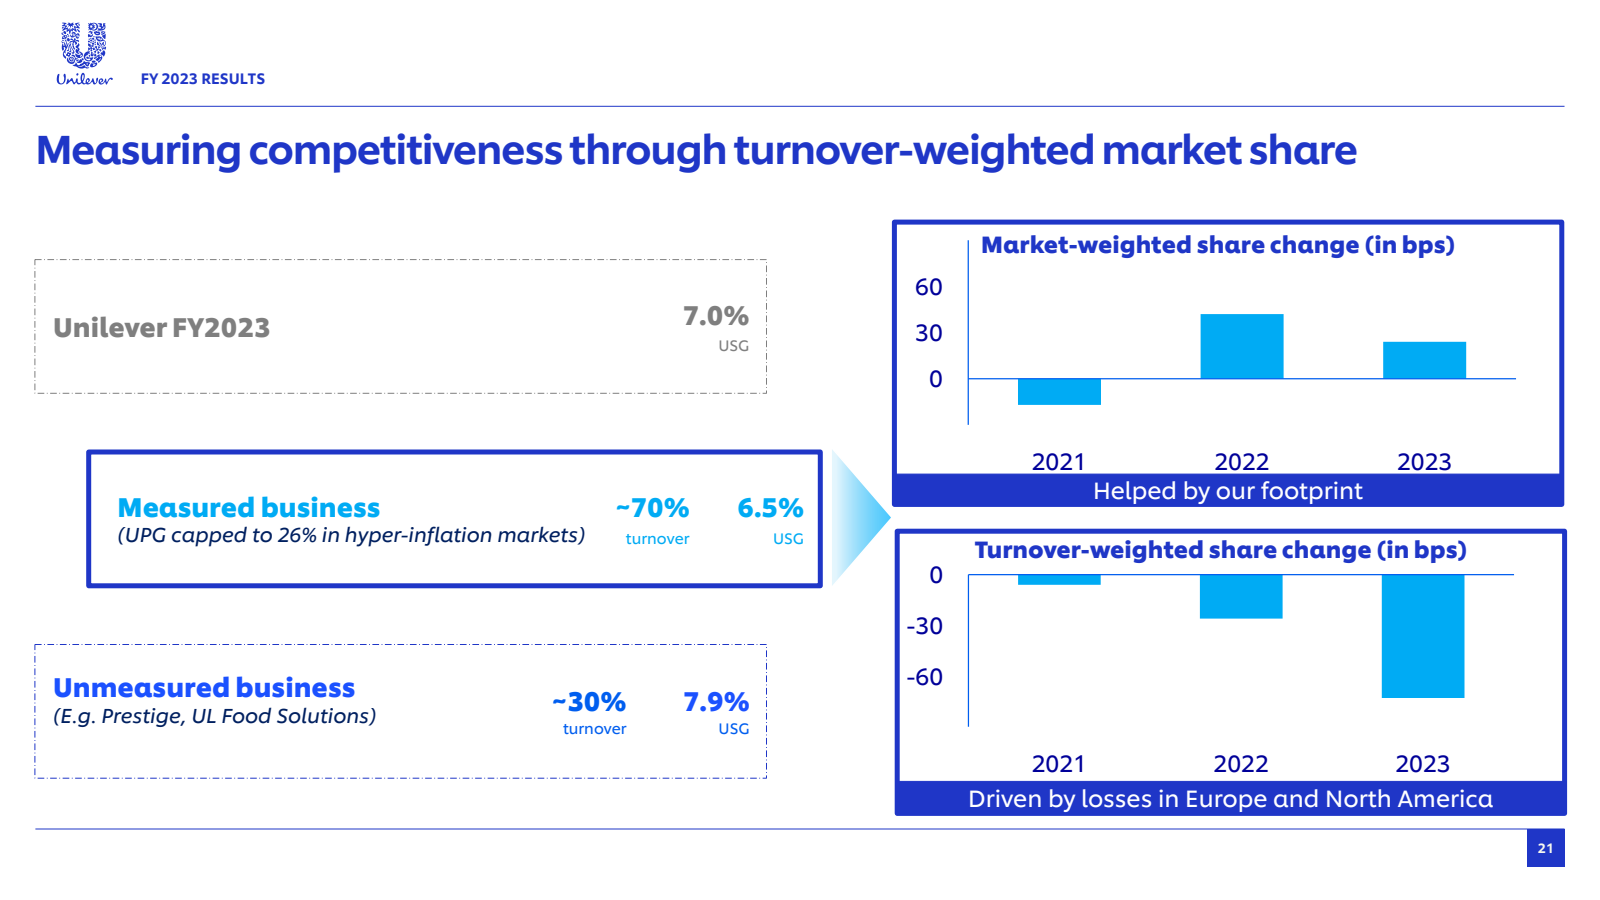 Unilever FY 2023 RES